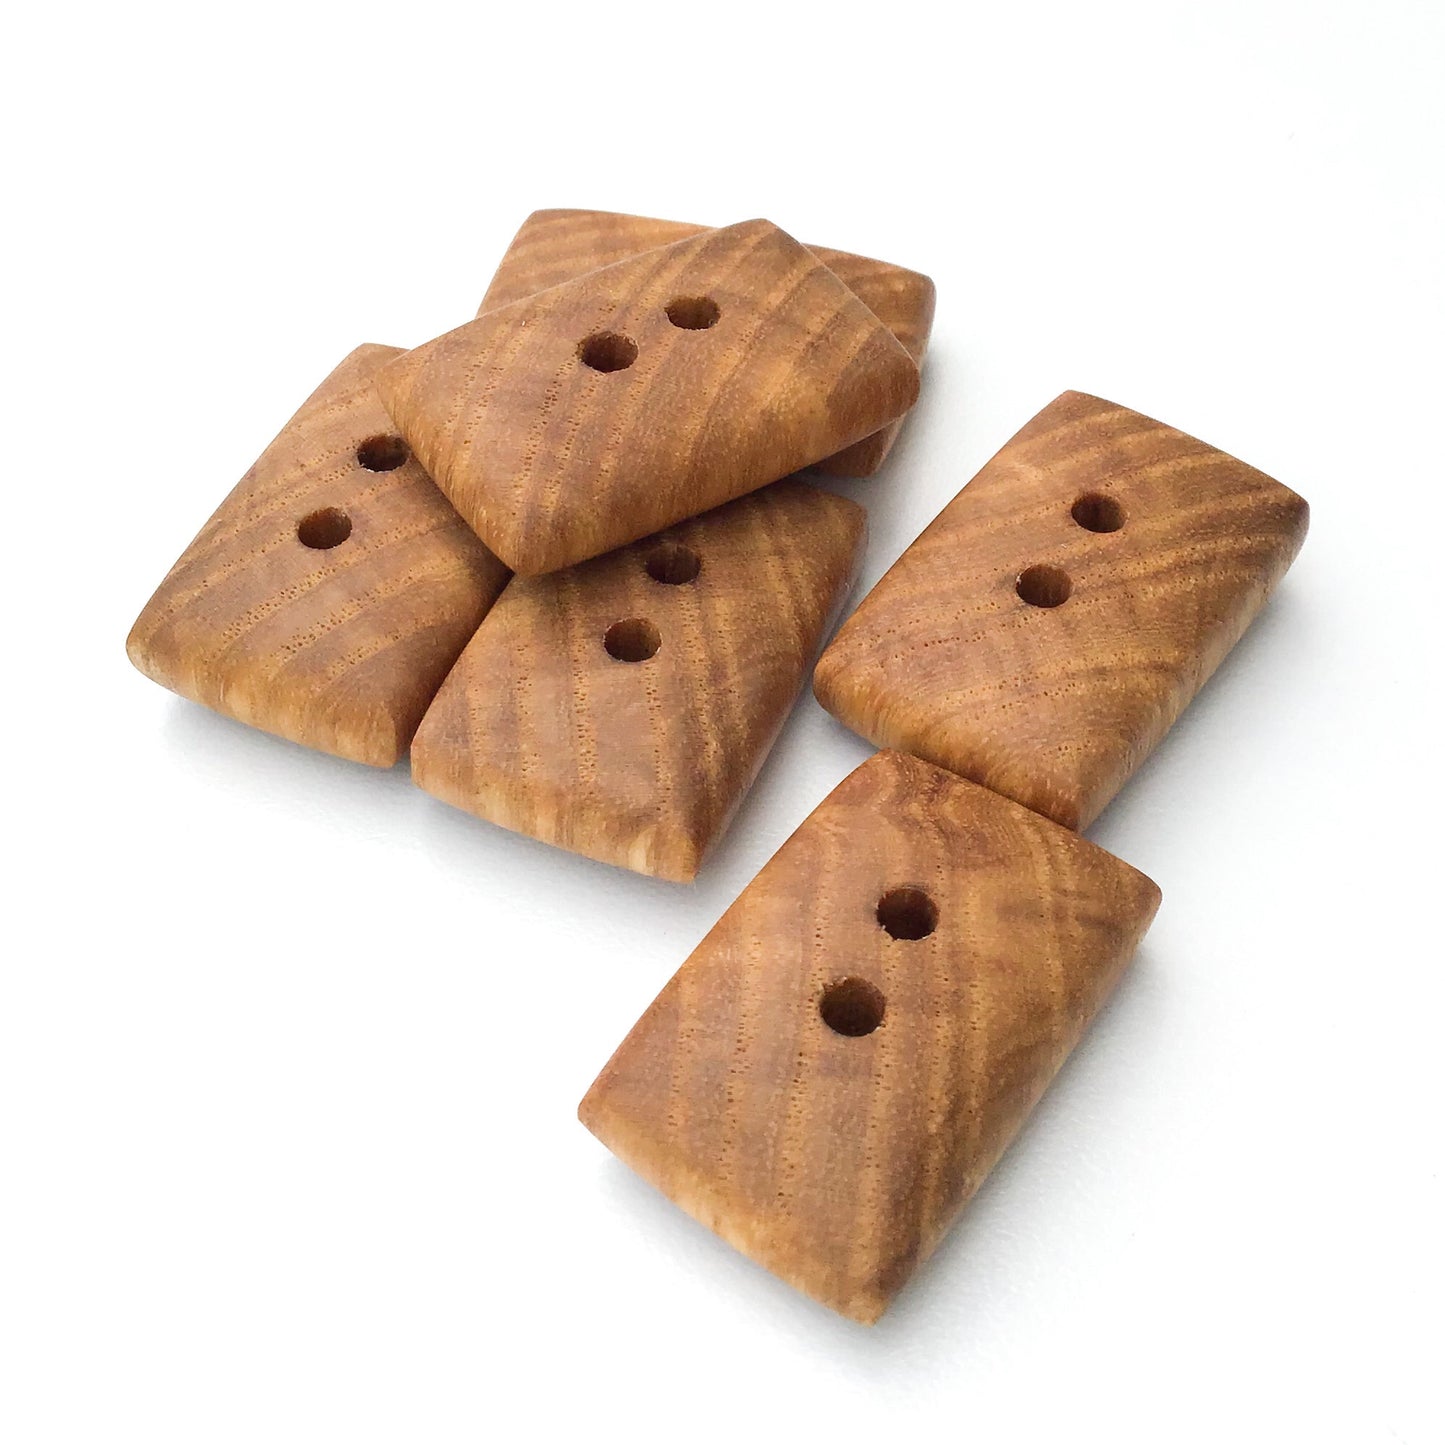 Ash Wood Buttons - Rounded Edge Rectangular Wood Buttons - 11/16" x 1 1/16" - 6 Pack